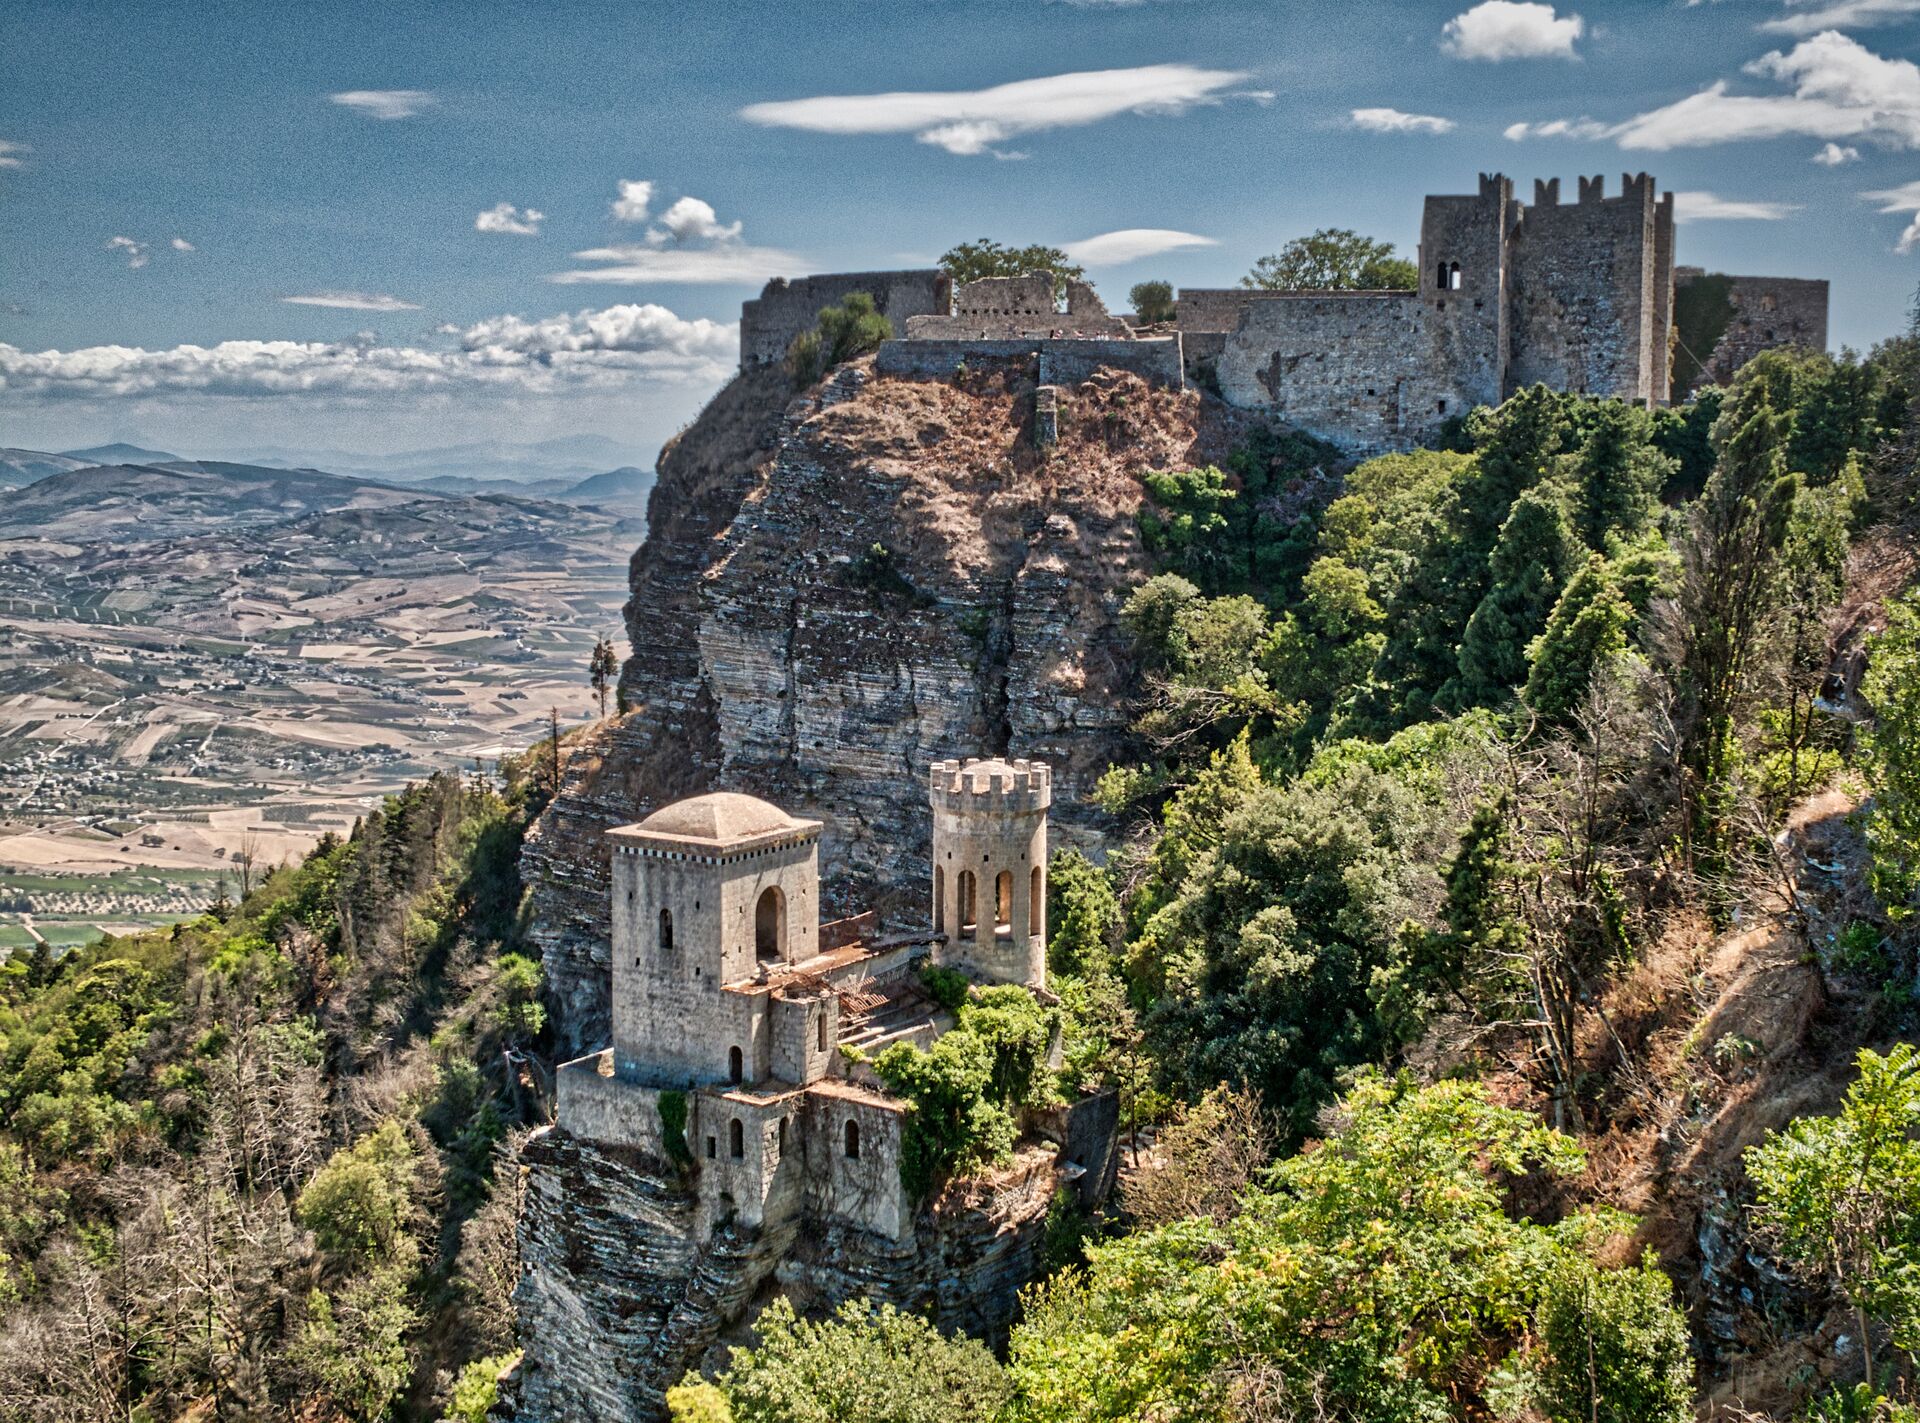 Erice castle in Sicily is perched high in a montuanside surrounded by green trees with the fields stretching out below and behind